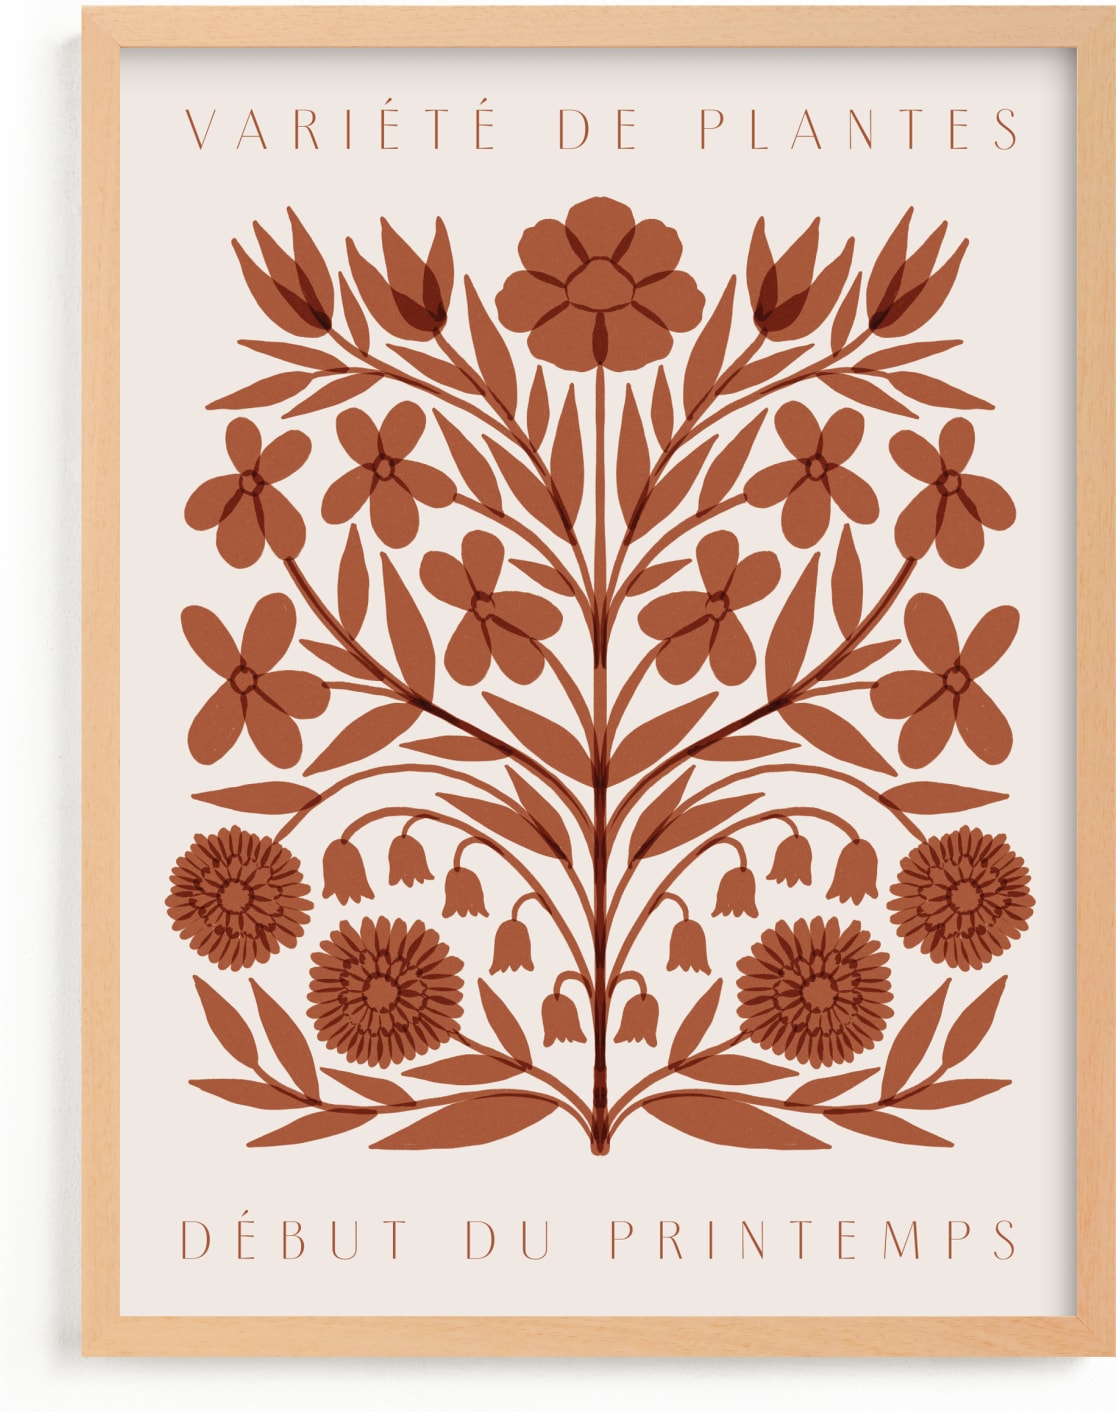 This is a brown, orange, red art by Katharine Watson called Les Plantes I.